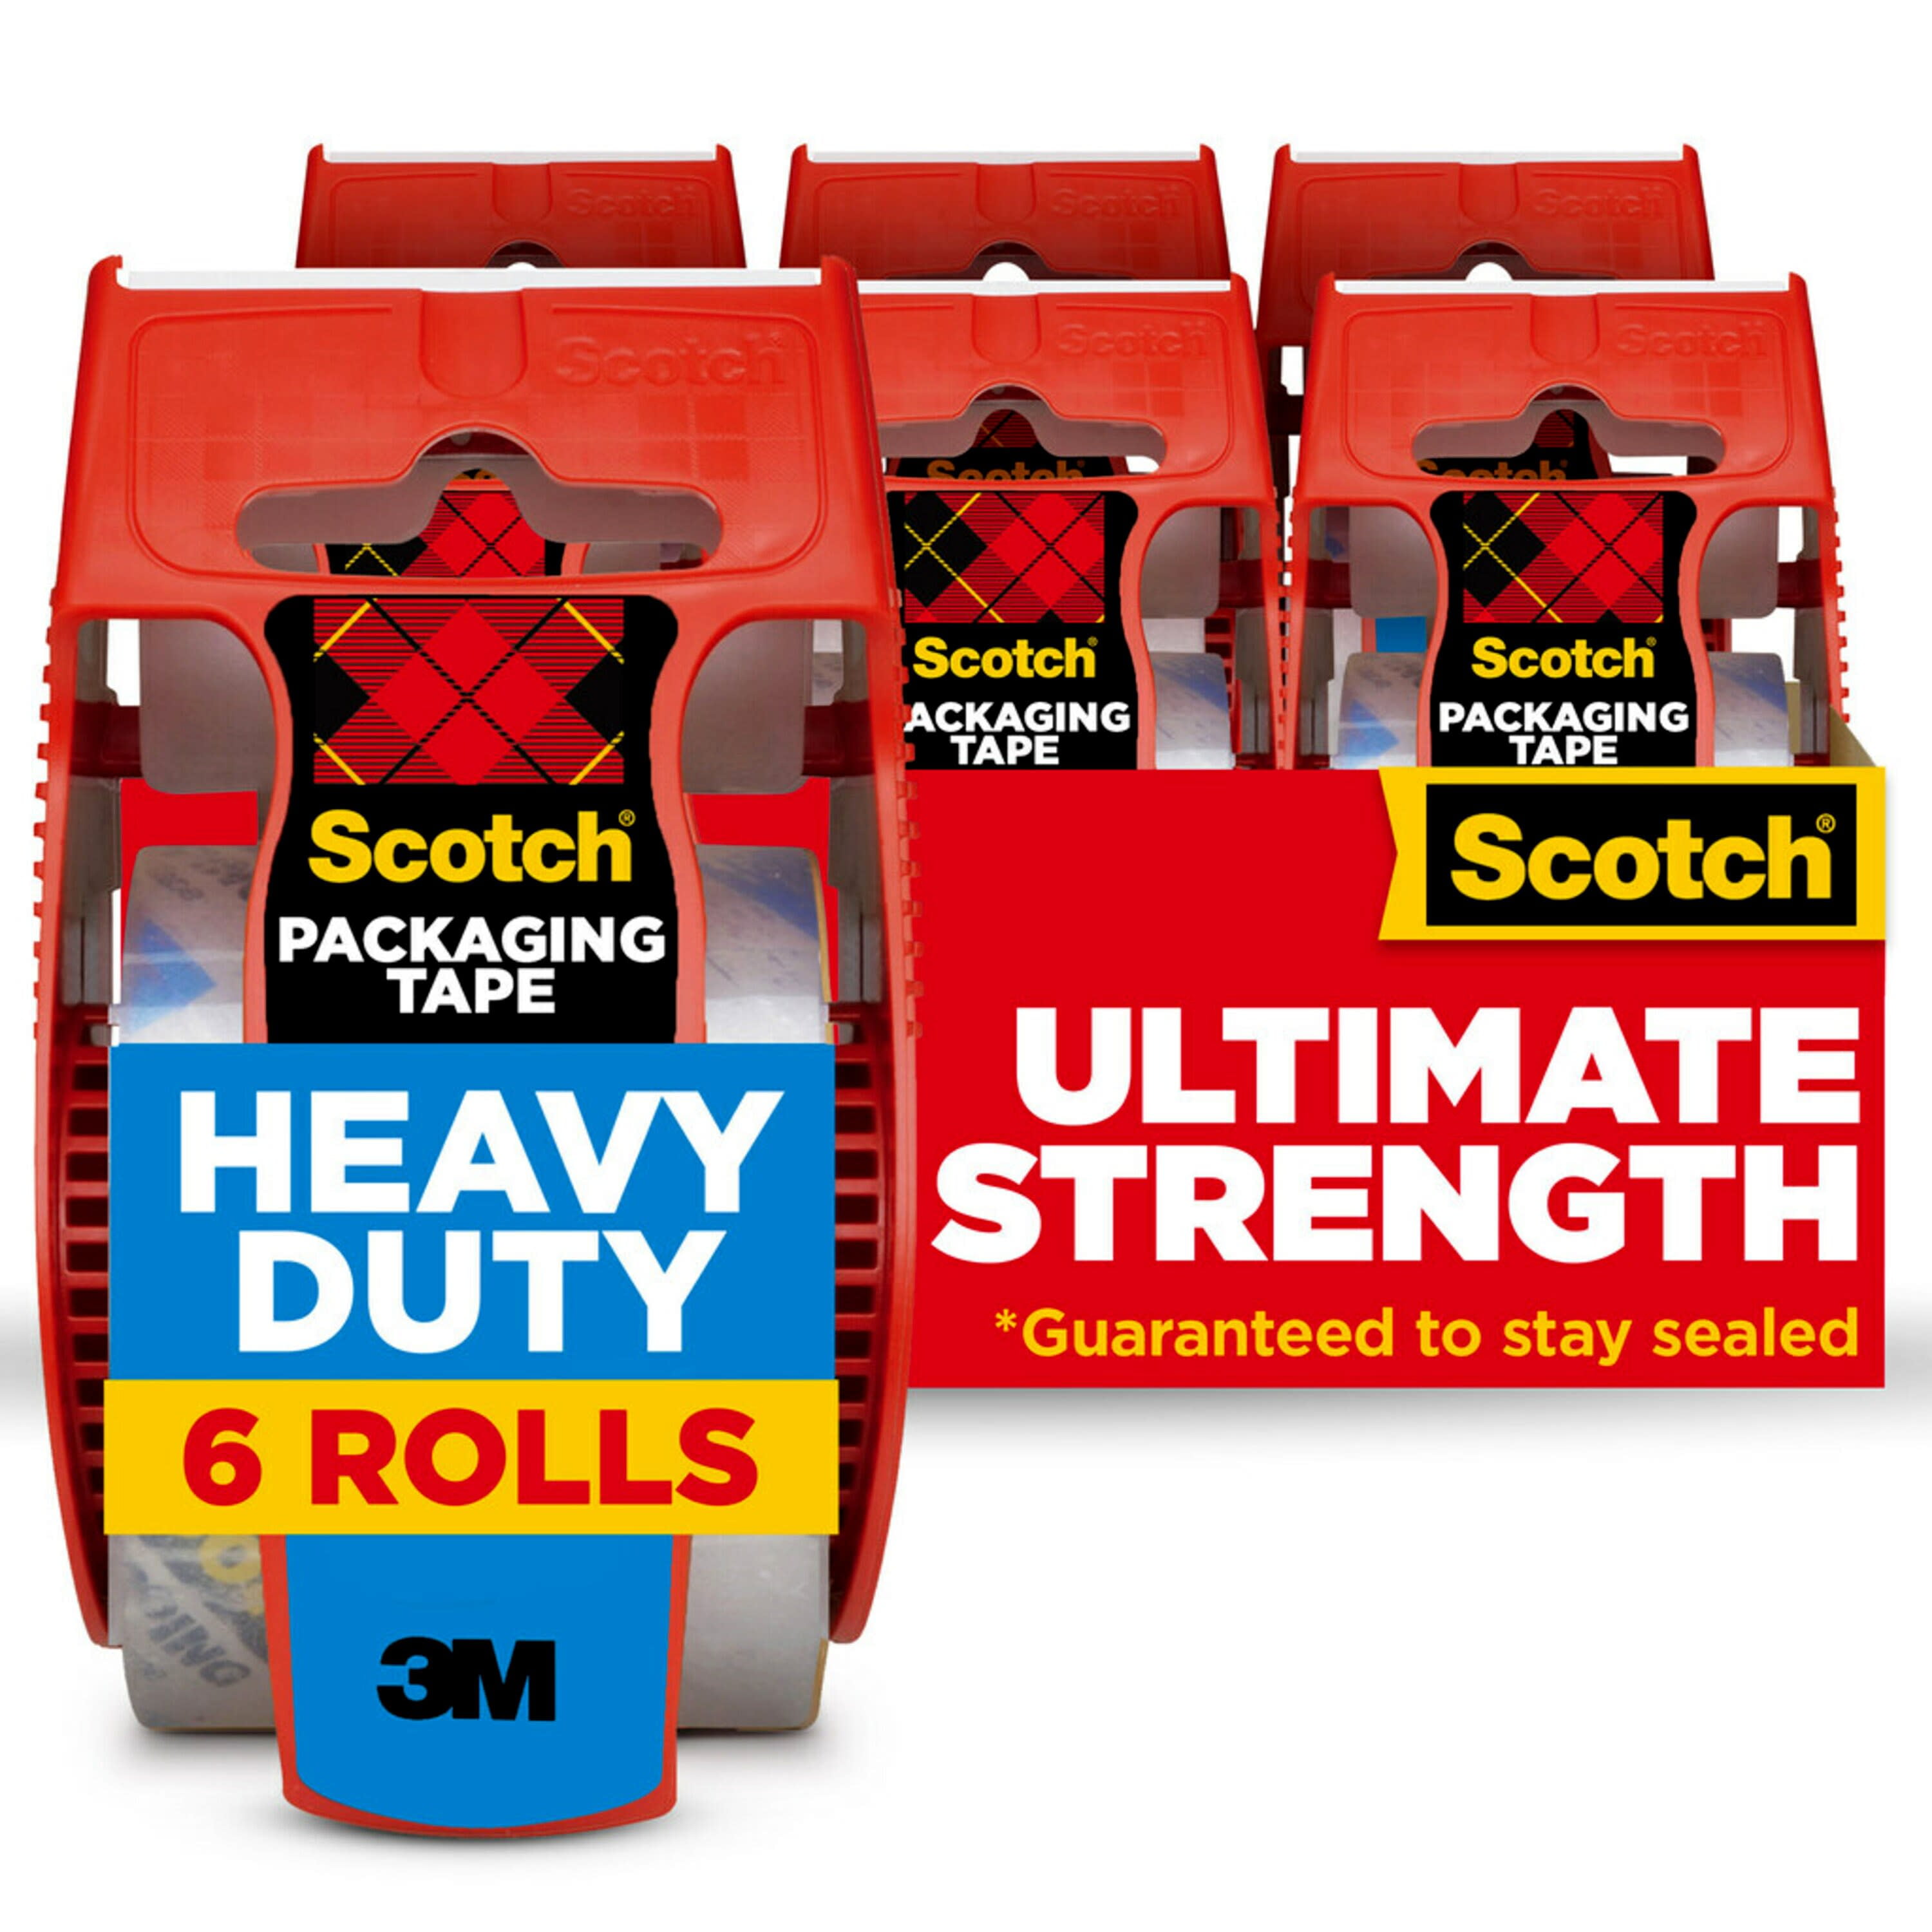 Packt by Scotch™ Paper Packing Tape, 1.92 in x 21.8 yd